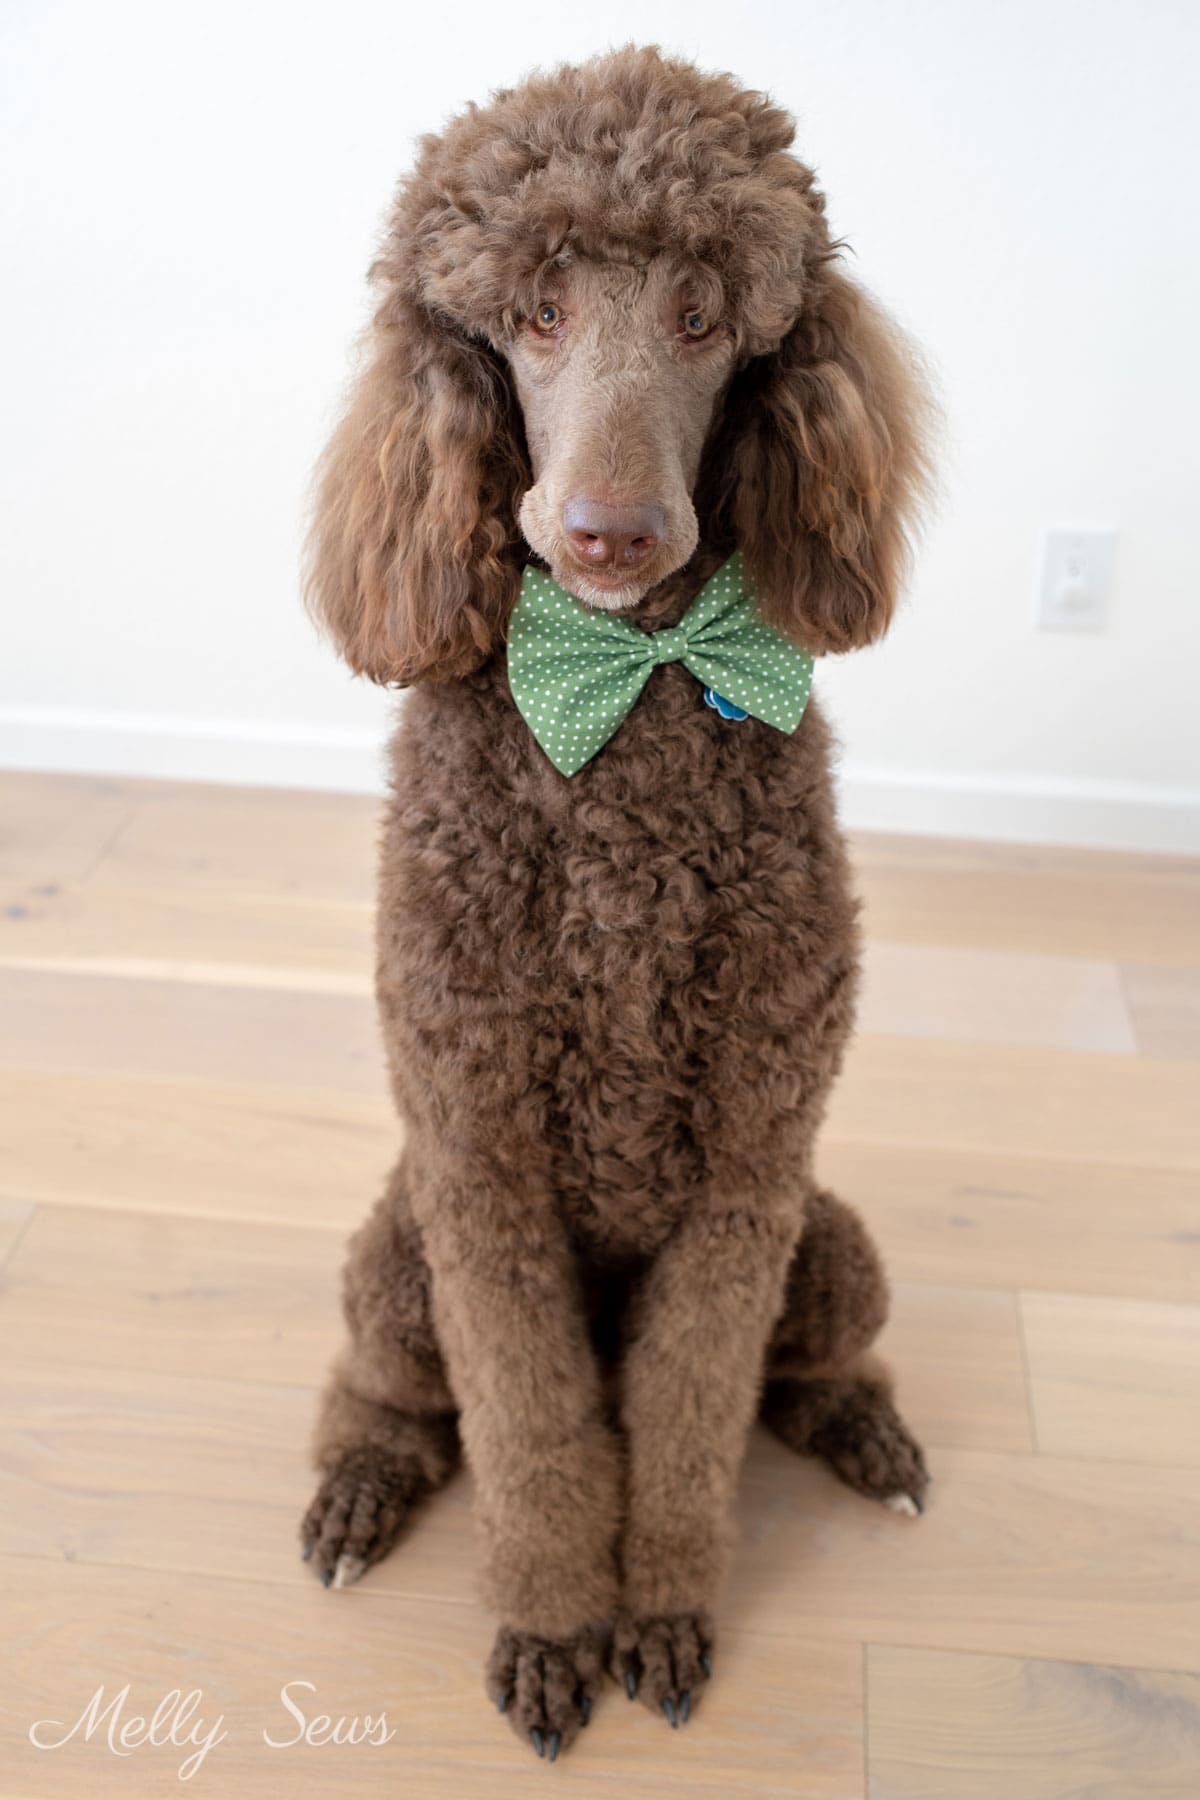 Chocolate Standard poodle wearing a green bow tie on collar